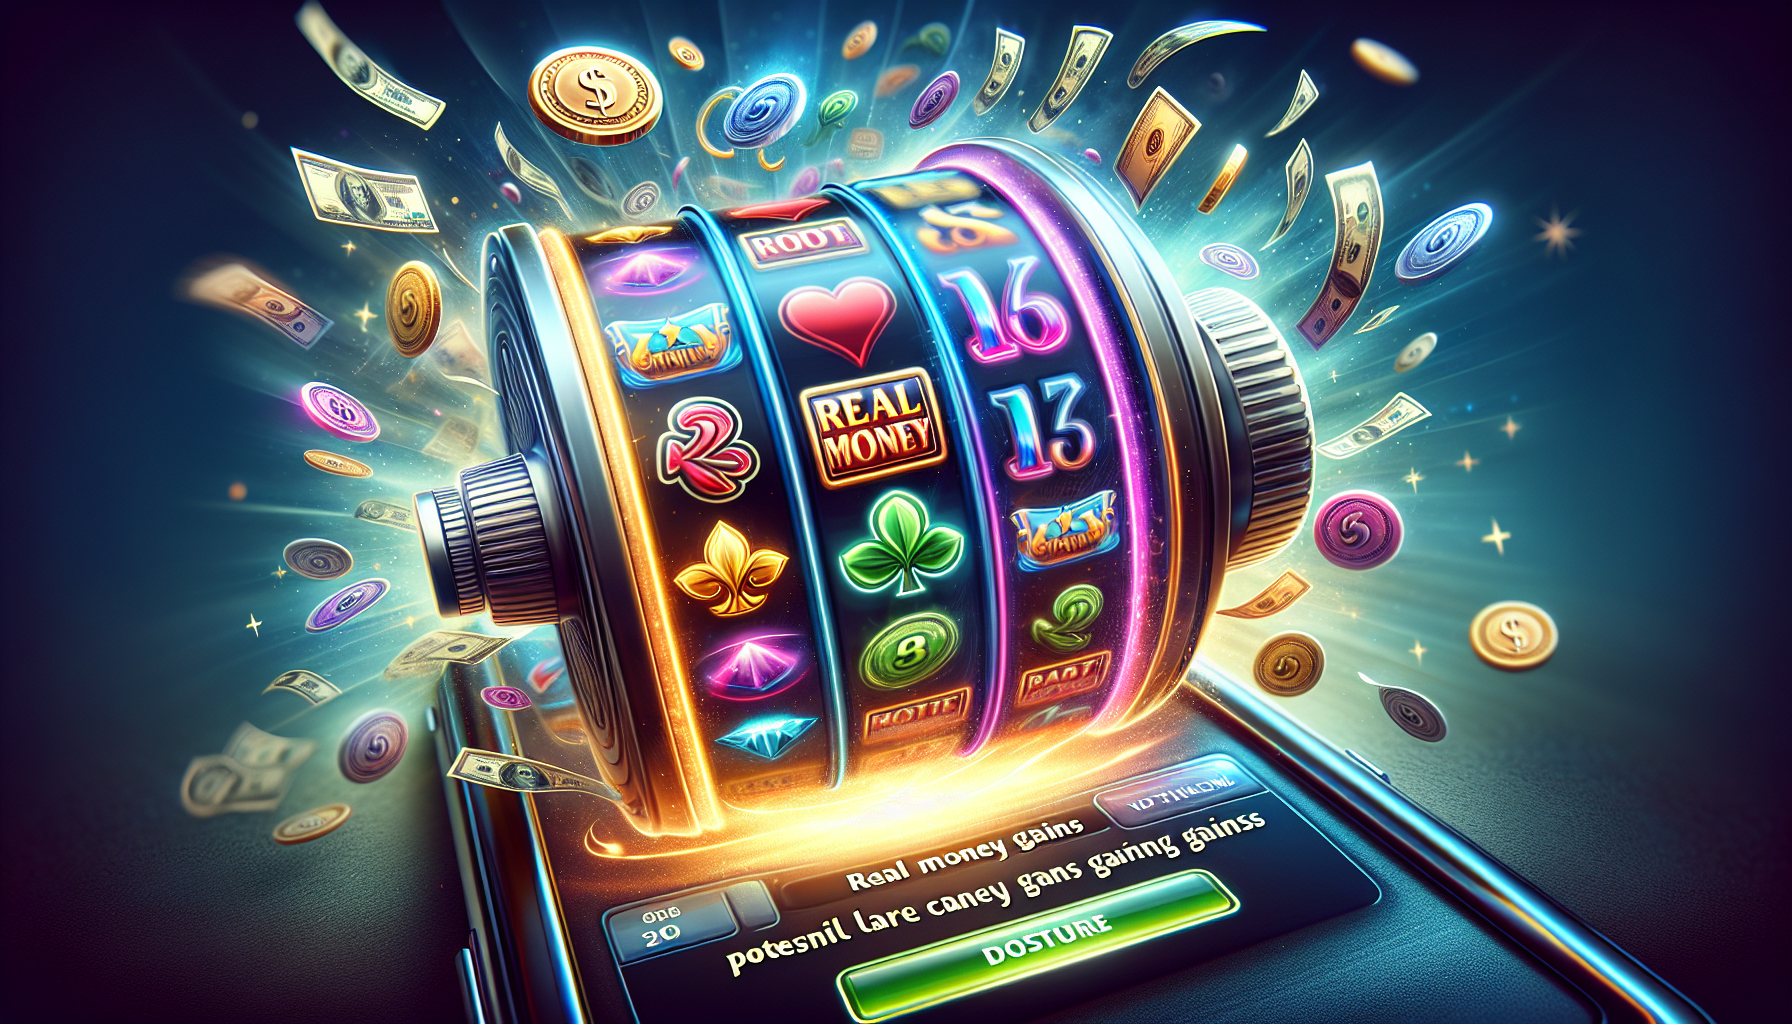 Do Mobile Slot Games Pay Real Money?